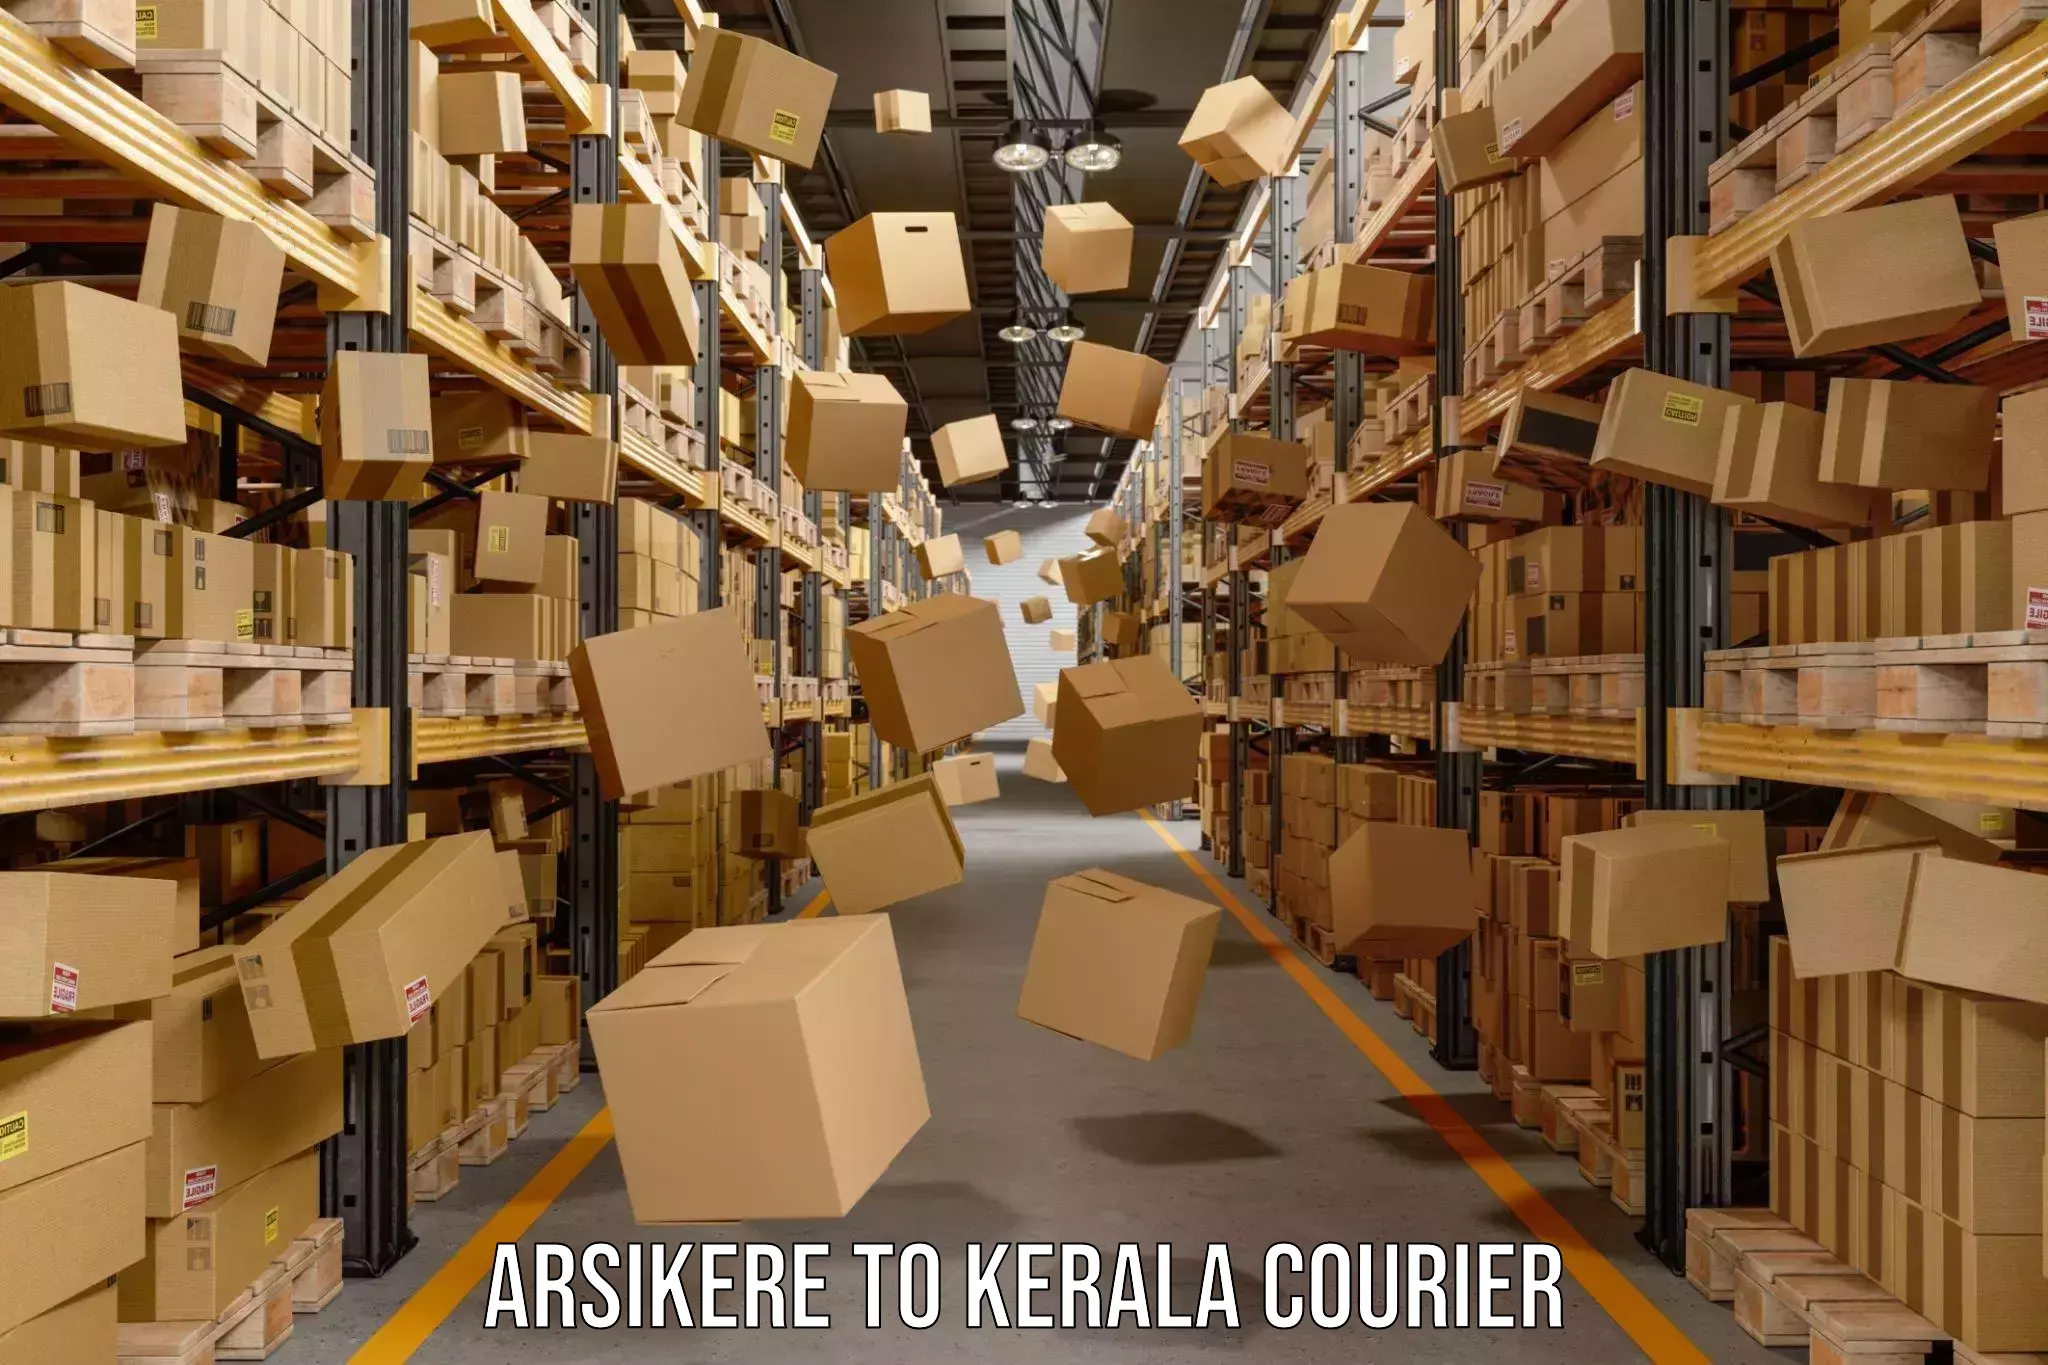 Courier insurance Arsikere to Kerala